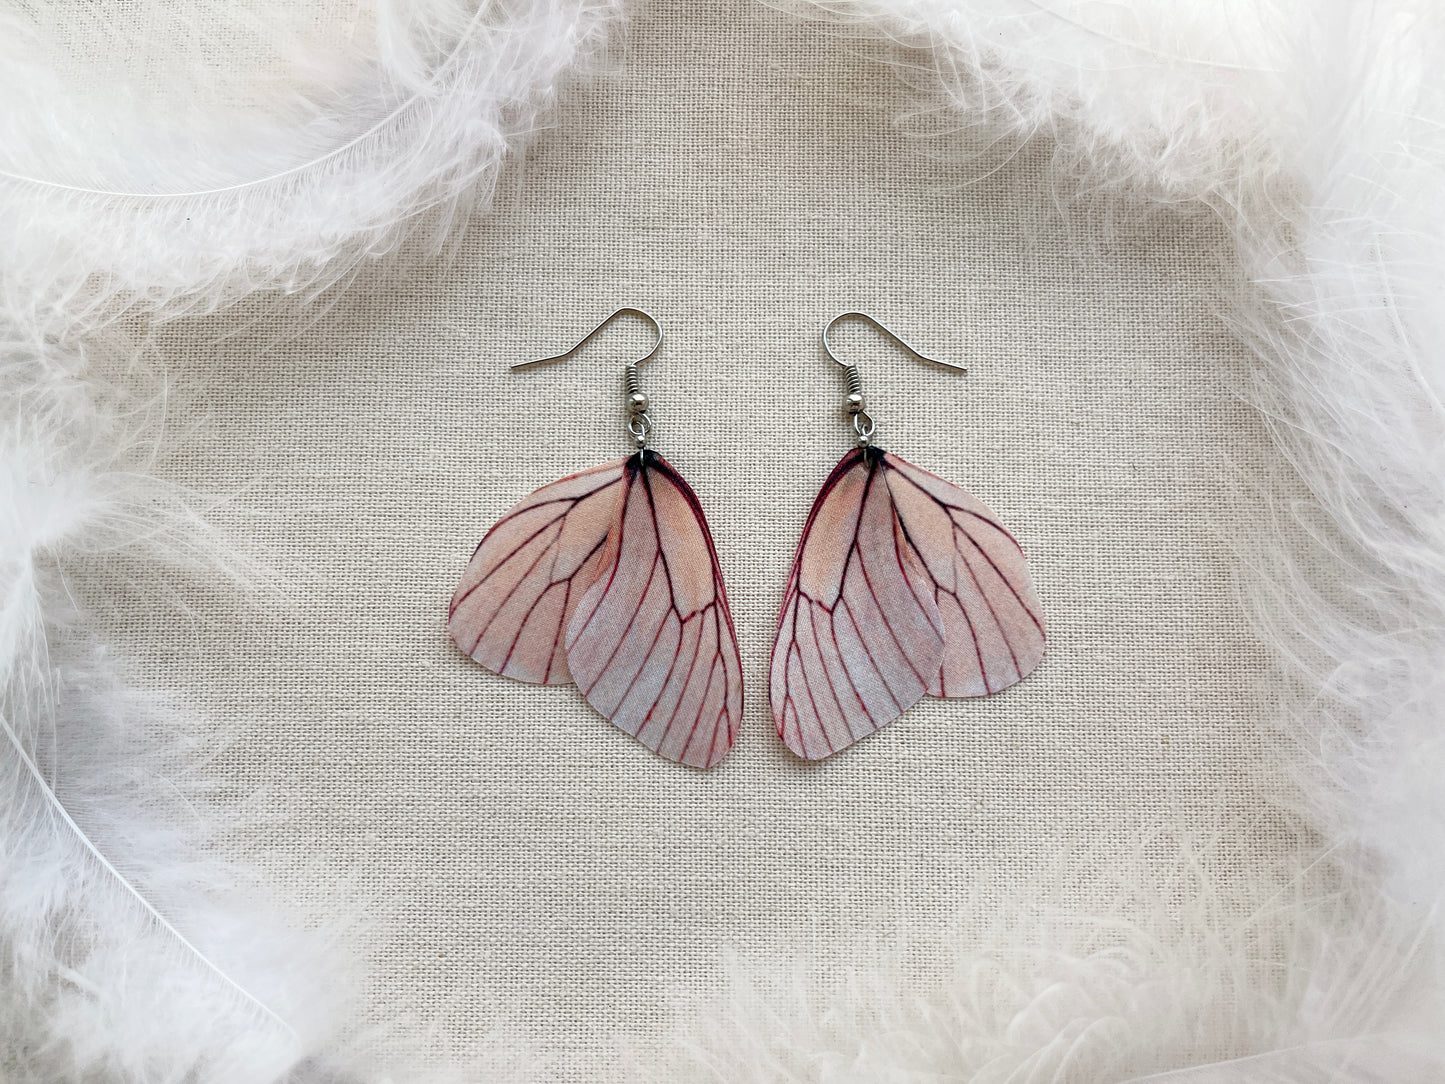 Dainty Wing Earrings - perfect for any occasion